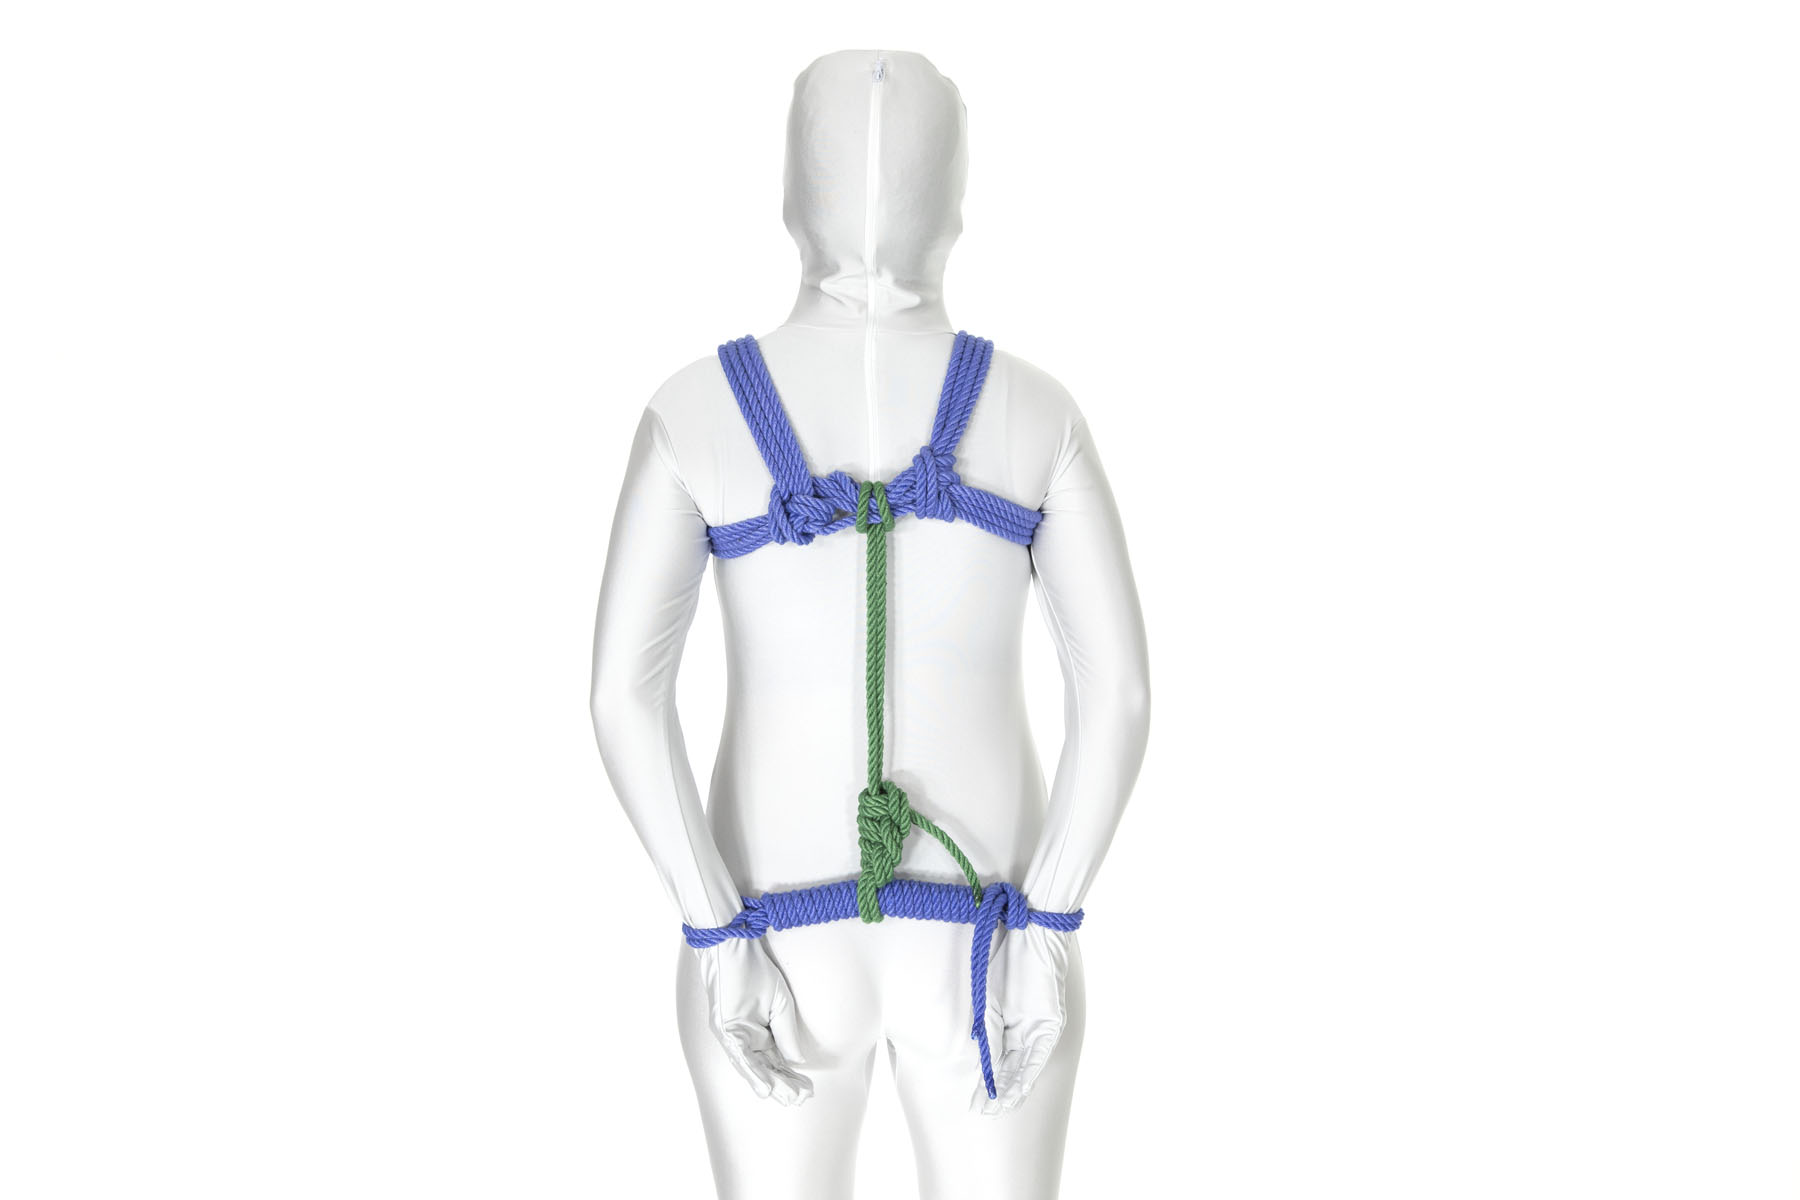 A rear view of a person in a white bodysuit wearing a blue chest harness. Their arms hang straight down, slightly behind their back, with the backs of the hands resting on the buttocks. The wrists are separated by about eight inches and are bound together by a bar tie in blue rope. A green rope connects the center of the bar tie to the chest harness.